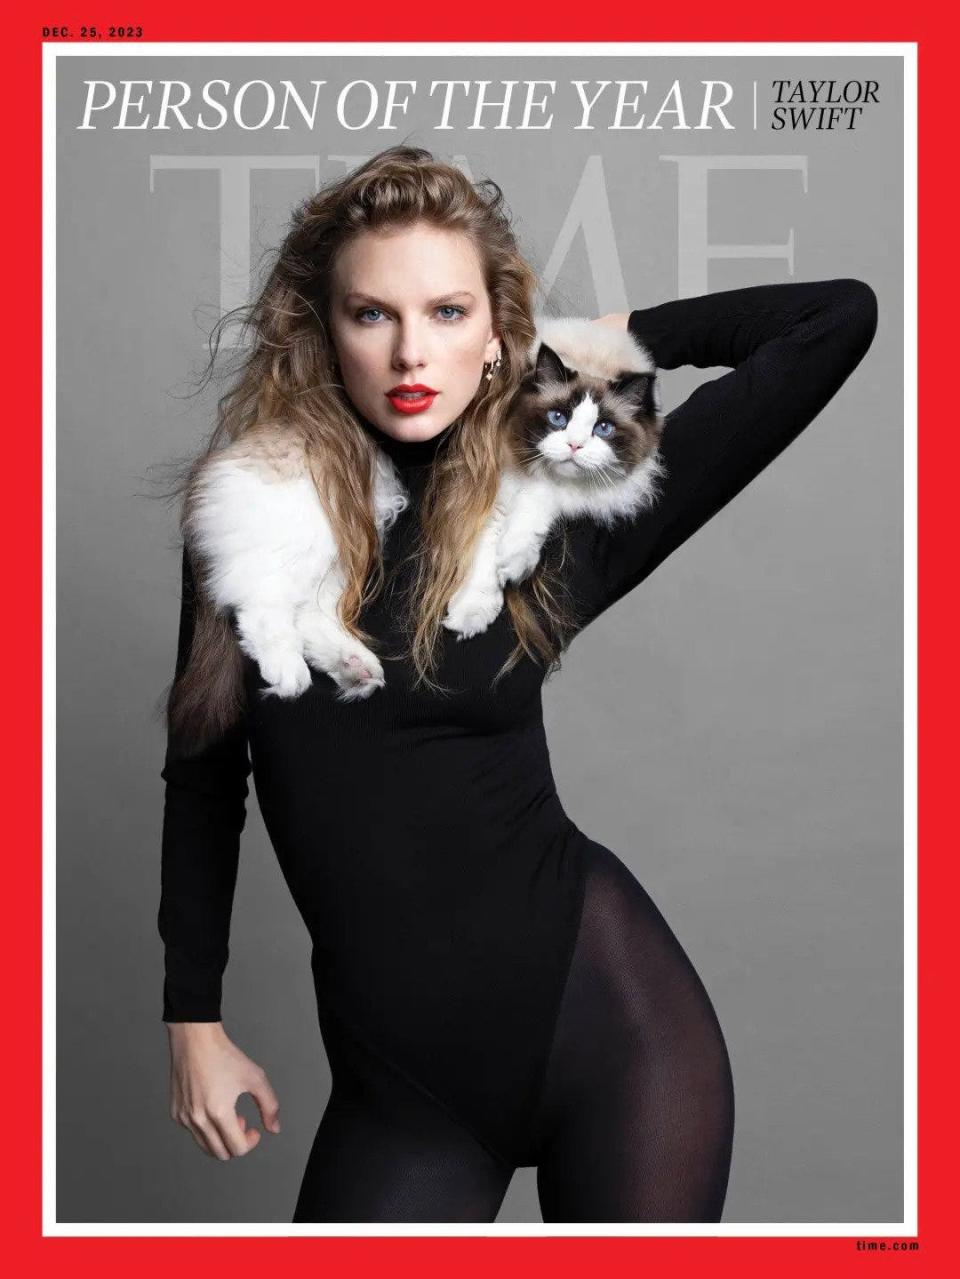 The cover of Time magazine announcing Taylor Swift as its Person of the Year for 2023.